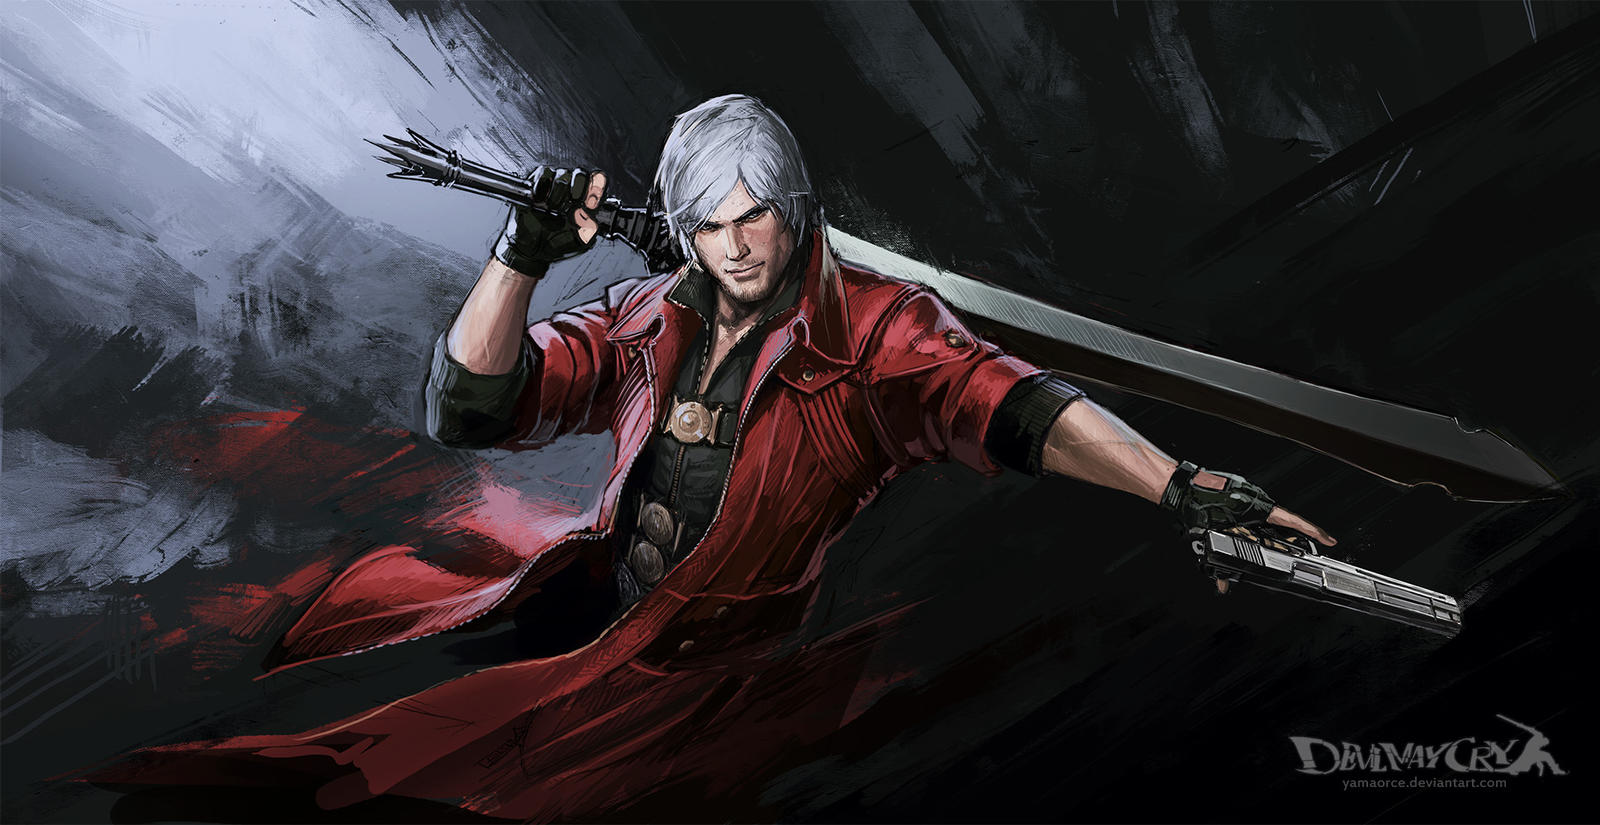 Devil May Cry 5: Dante by AnubisDHL on DeviantArt